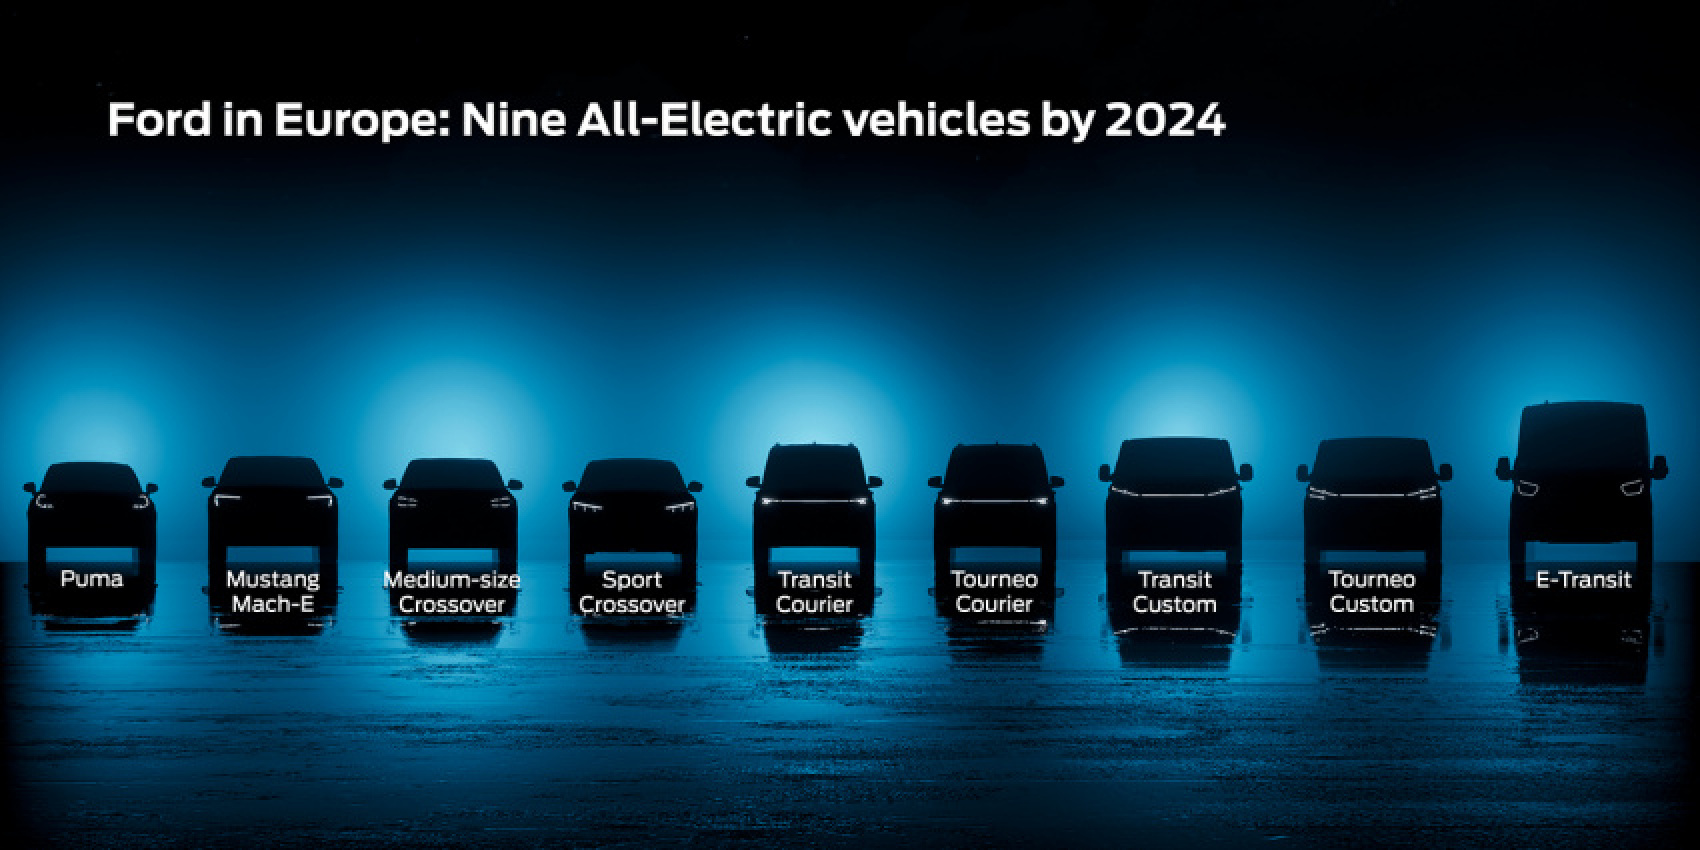 automobile, autos, cars, electric vehicle, ford, batteries, battery cells, cologne, craiova, electric transporters, europe, ford model e, germany, joint venture, puma, romania, sk on, suppliers, tourneo courier, tourneo custom, transit courier, transit custom, turkey, volkswagen, ford plans to release 7 new bevs in europe by 2024